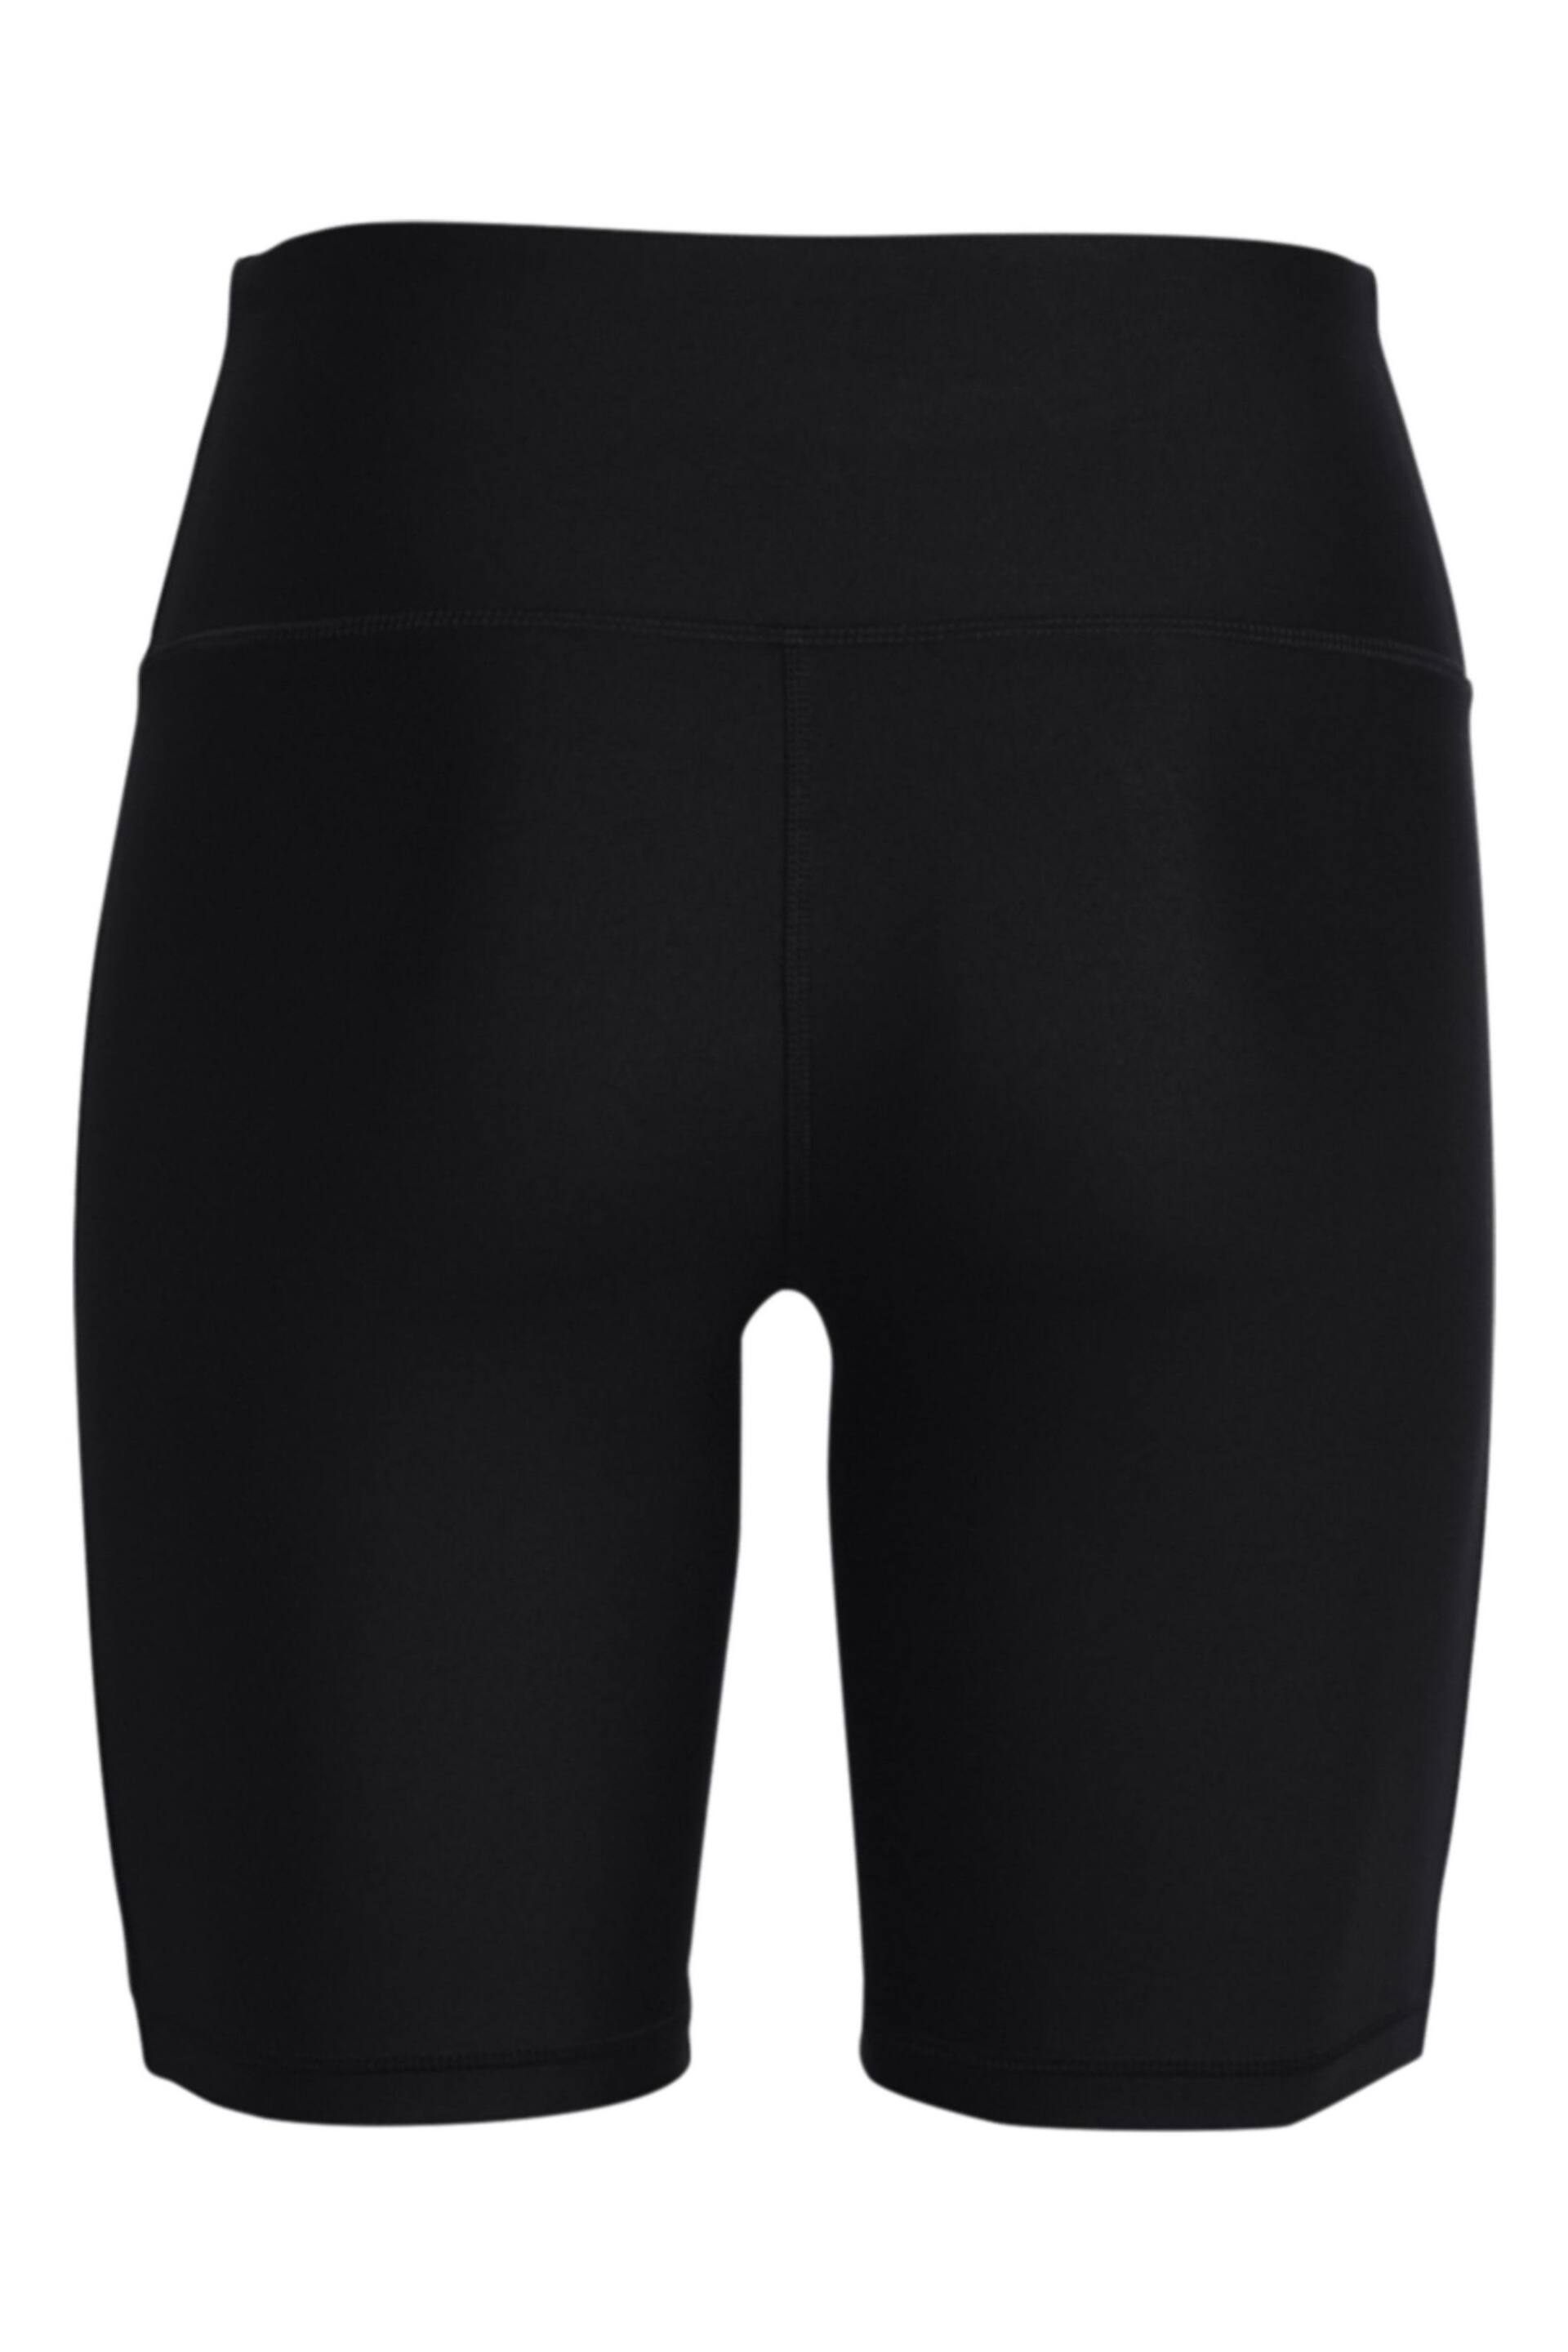 Under Armour HG Armour Cycling Shorts - Image 5 of 5